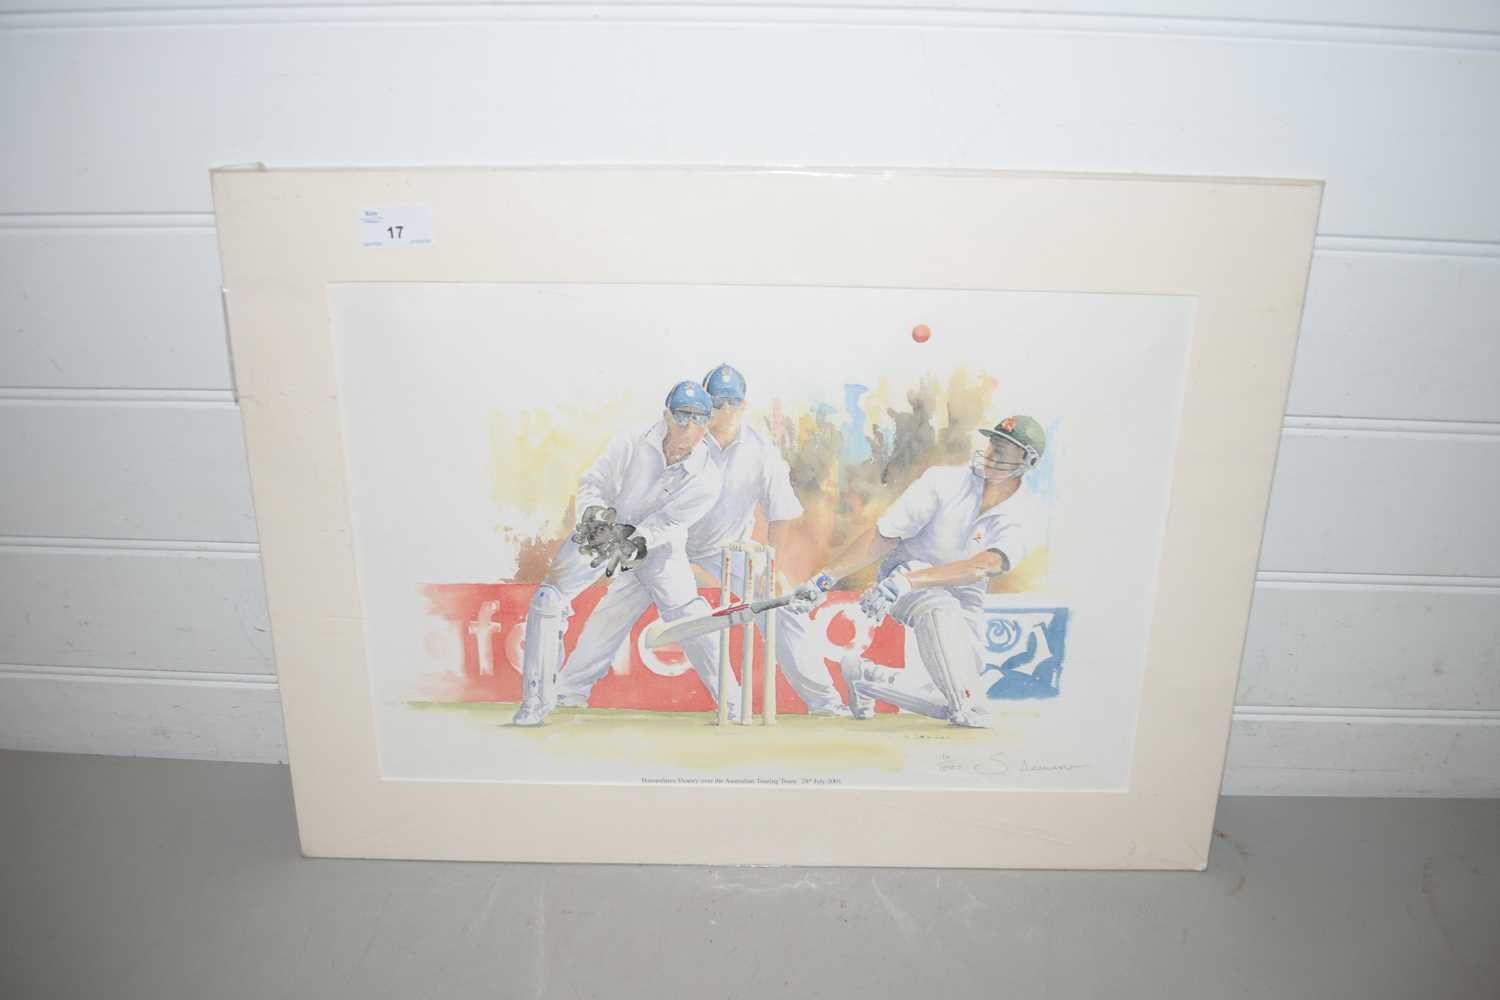 STEVE ARMON, 'HAMPSHIRE'S VICTORY OVER THE AUSTRALIAN TOURING TEAM', CRICKET MATCH DATED 28TH JULY